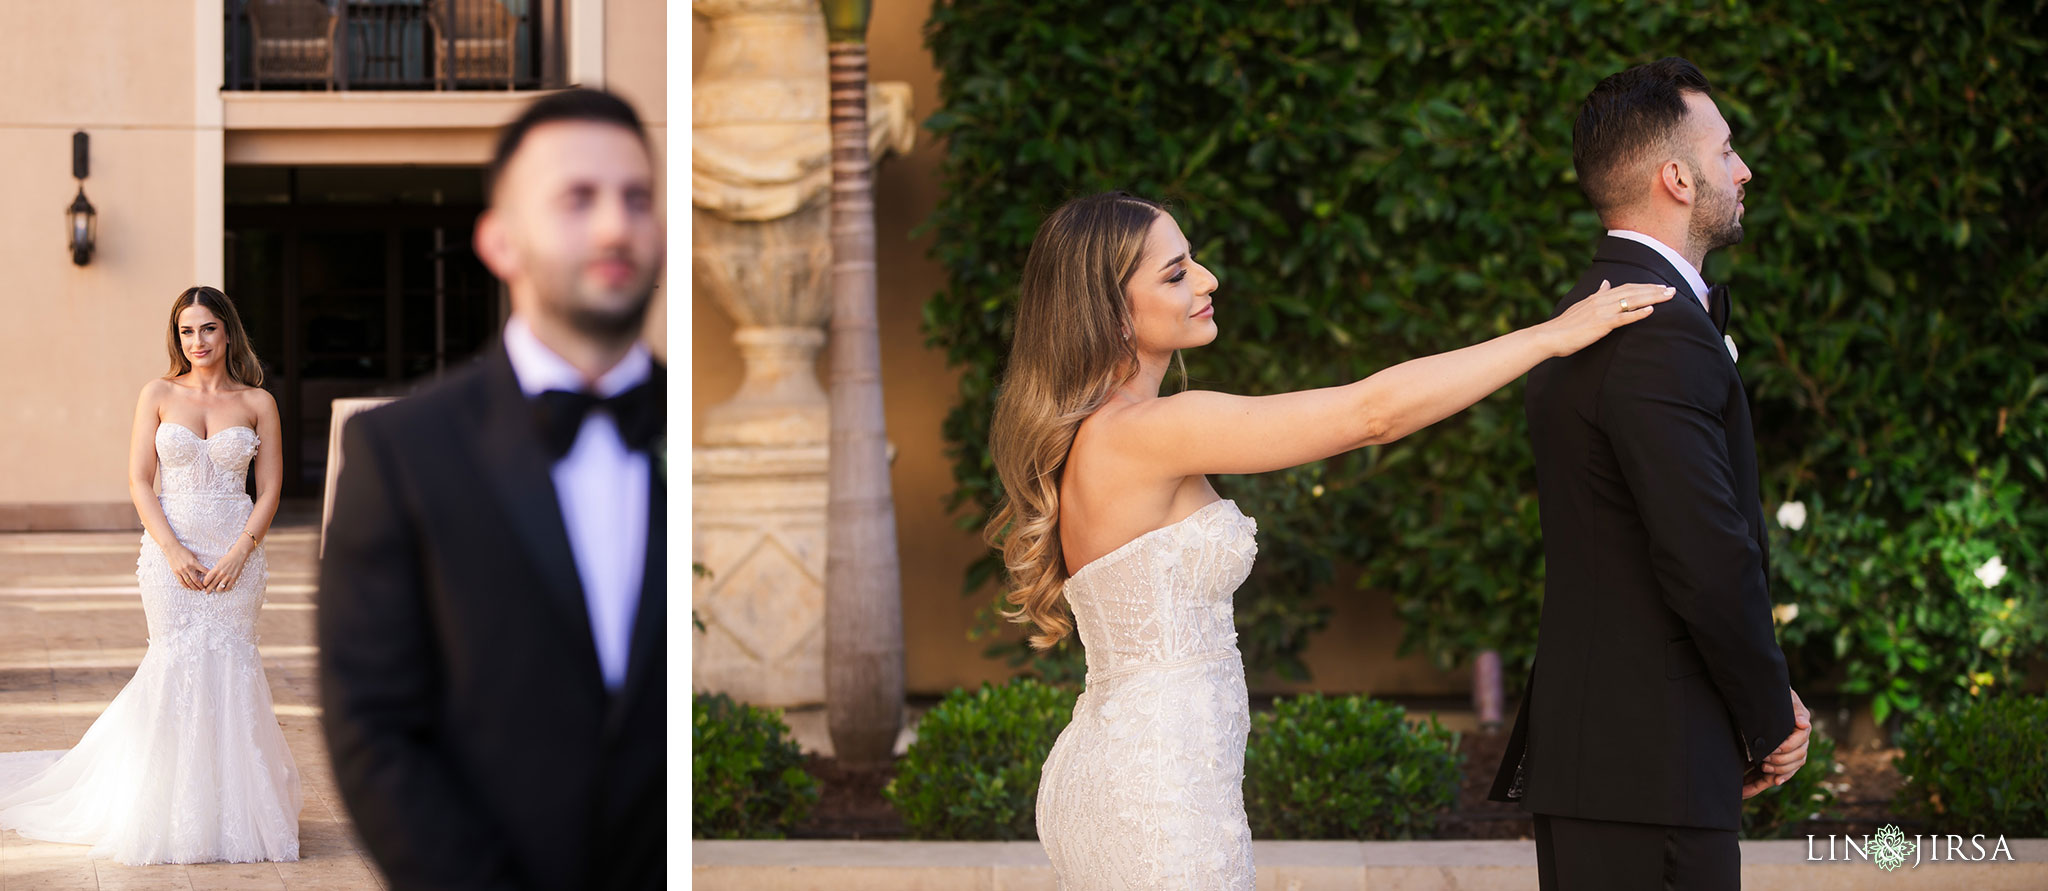 14 montage beverly hills persian wedding photography